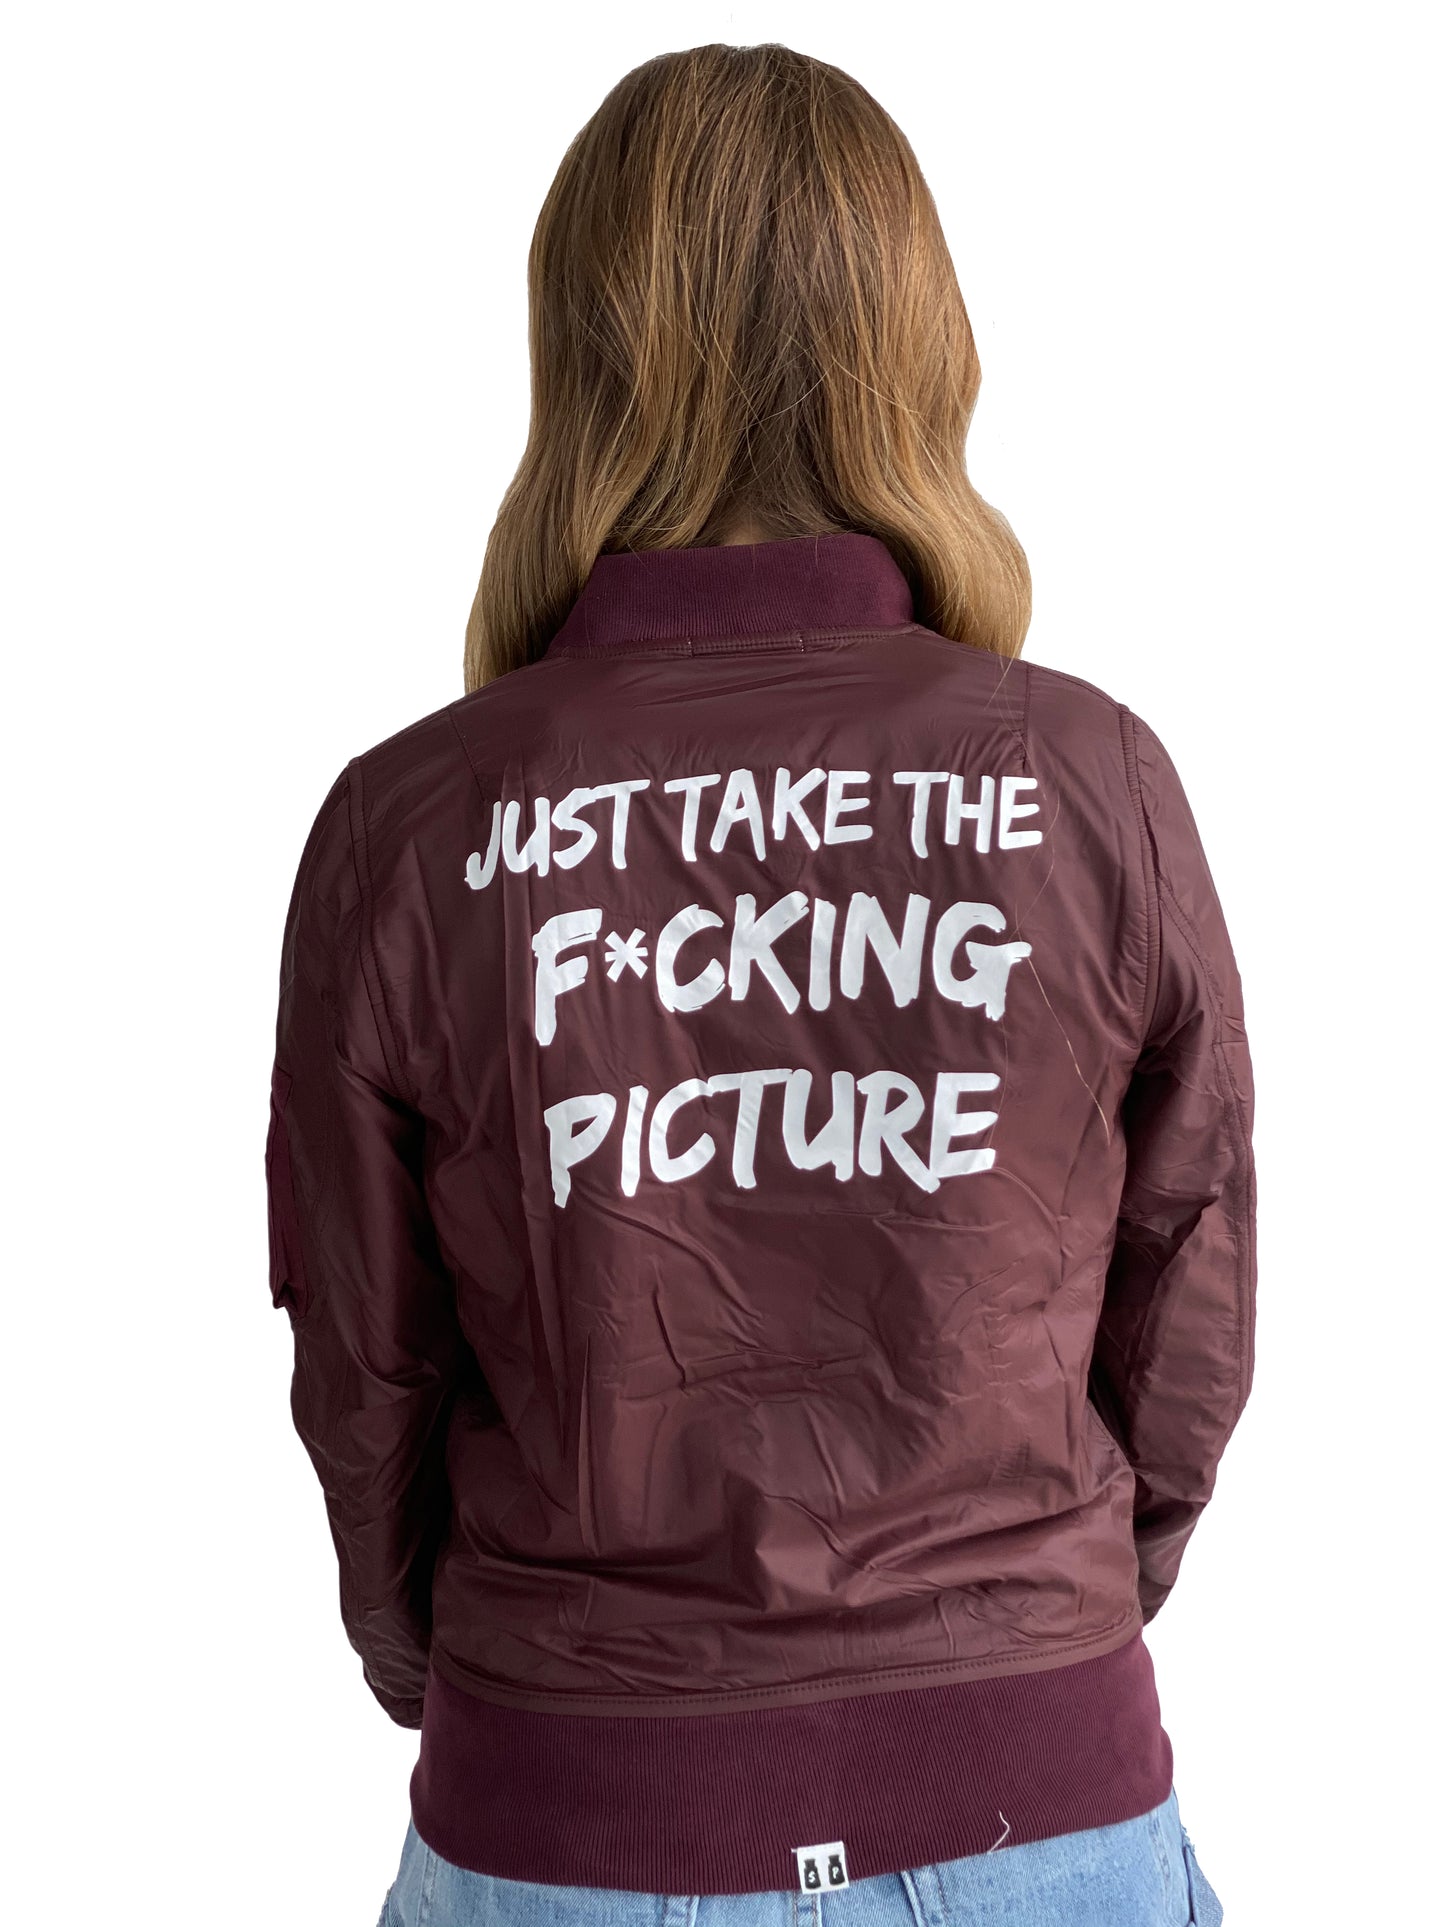 Women's Burgundy Bomber Jacket - "Just Take The F*cking Picture"